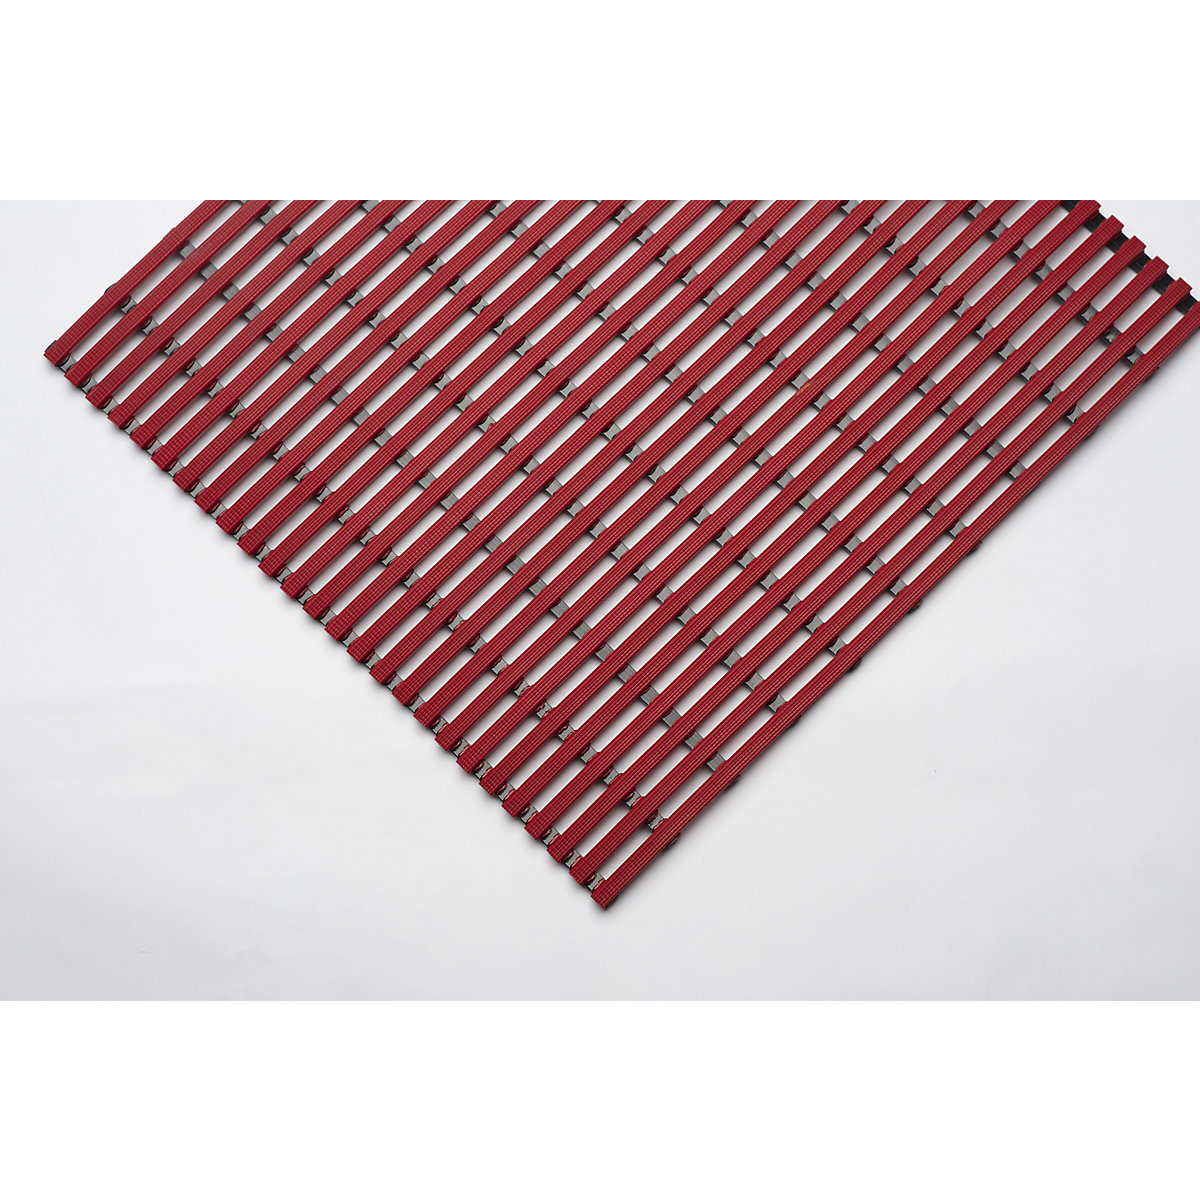 Floor mat for showers and changing rooms (Product illustration 22)-21